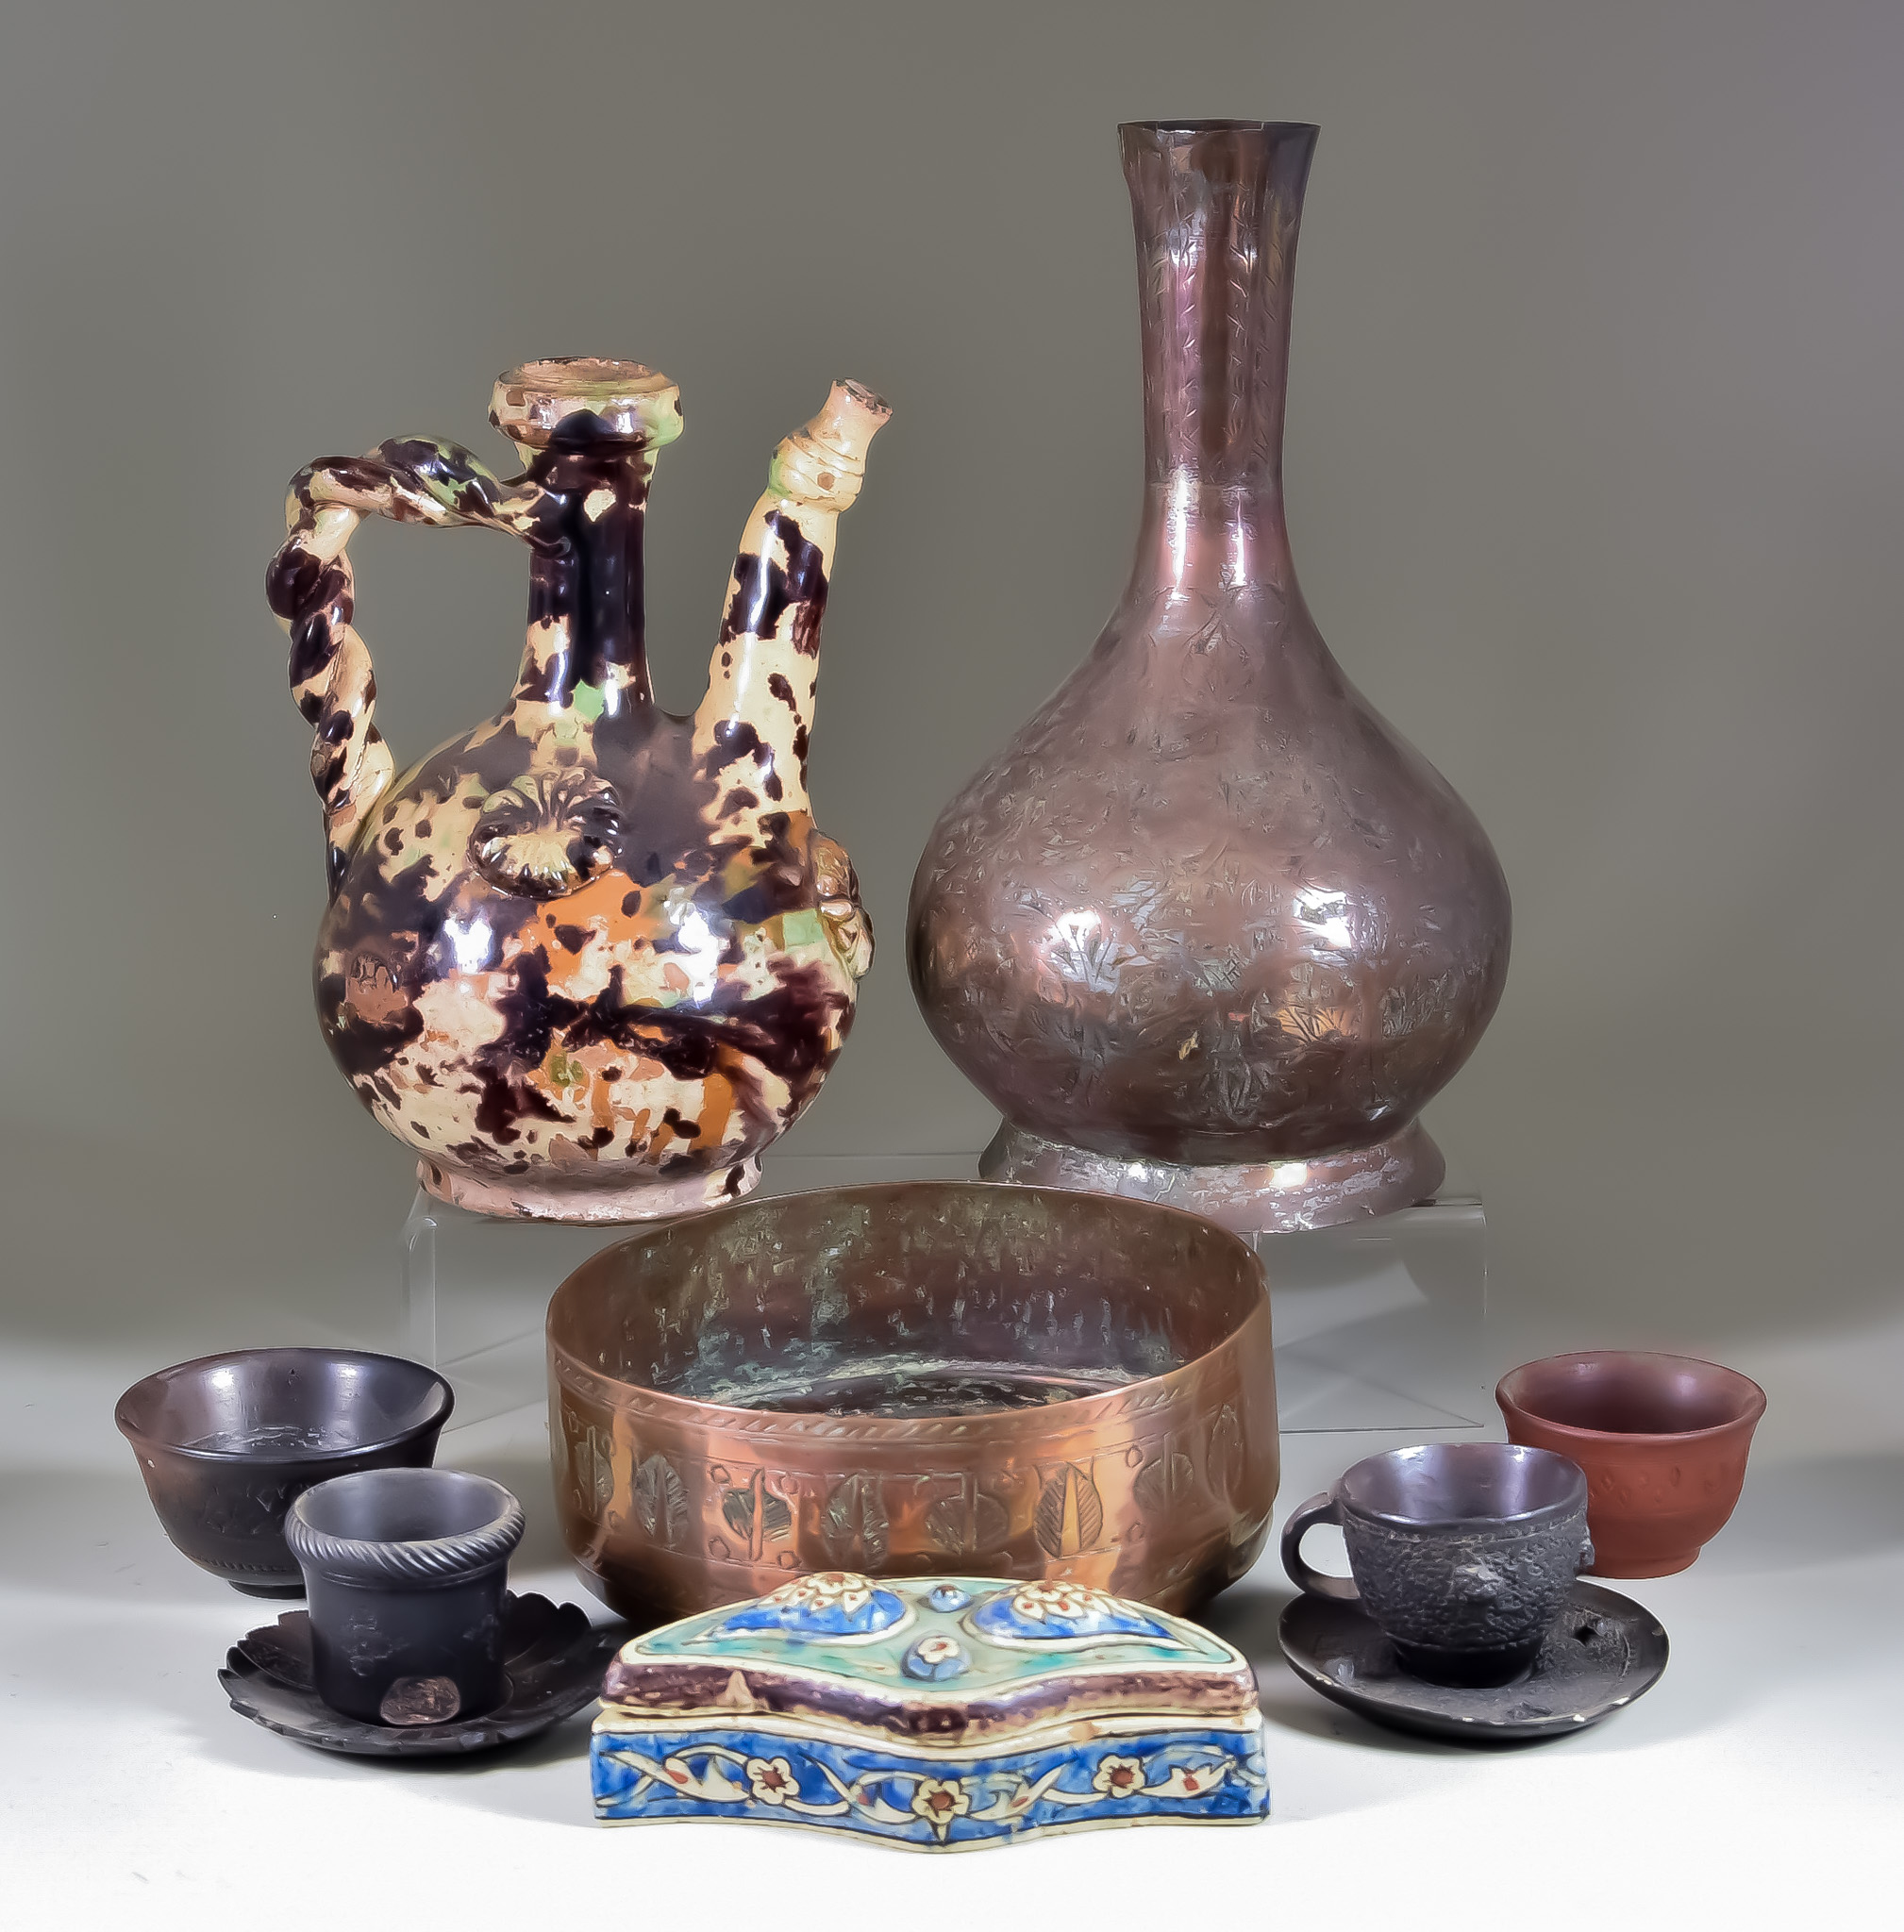 A Near Eastern Copper Bottle Vase, Circular Bowl, and mixed lot of Terracotta and Pottery, the